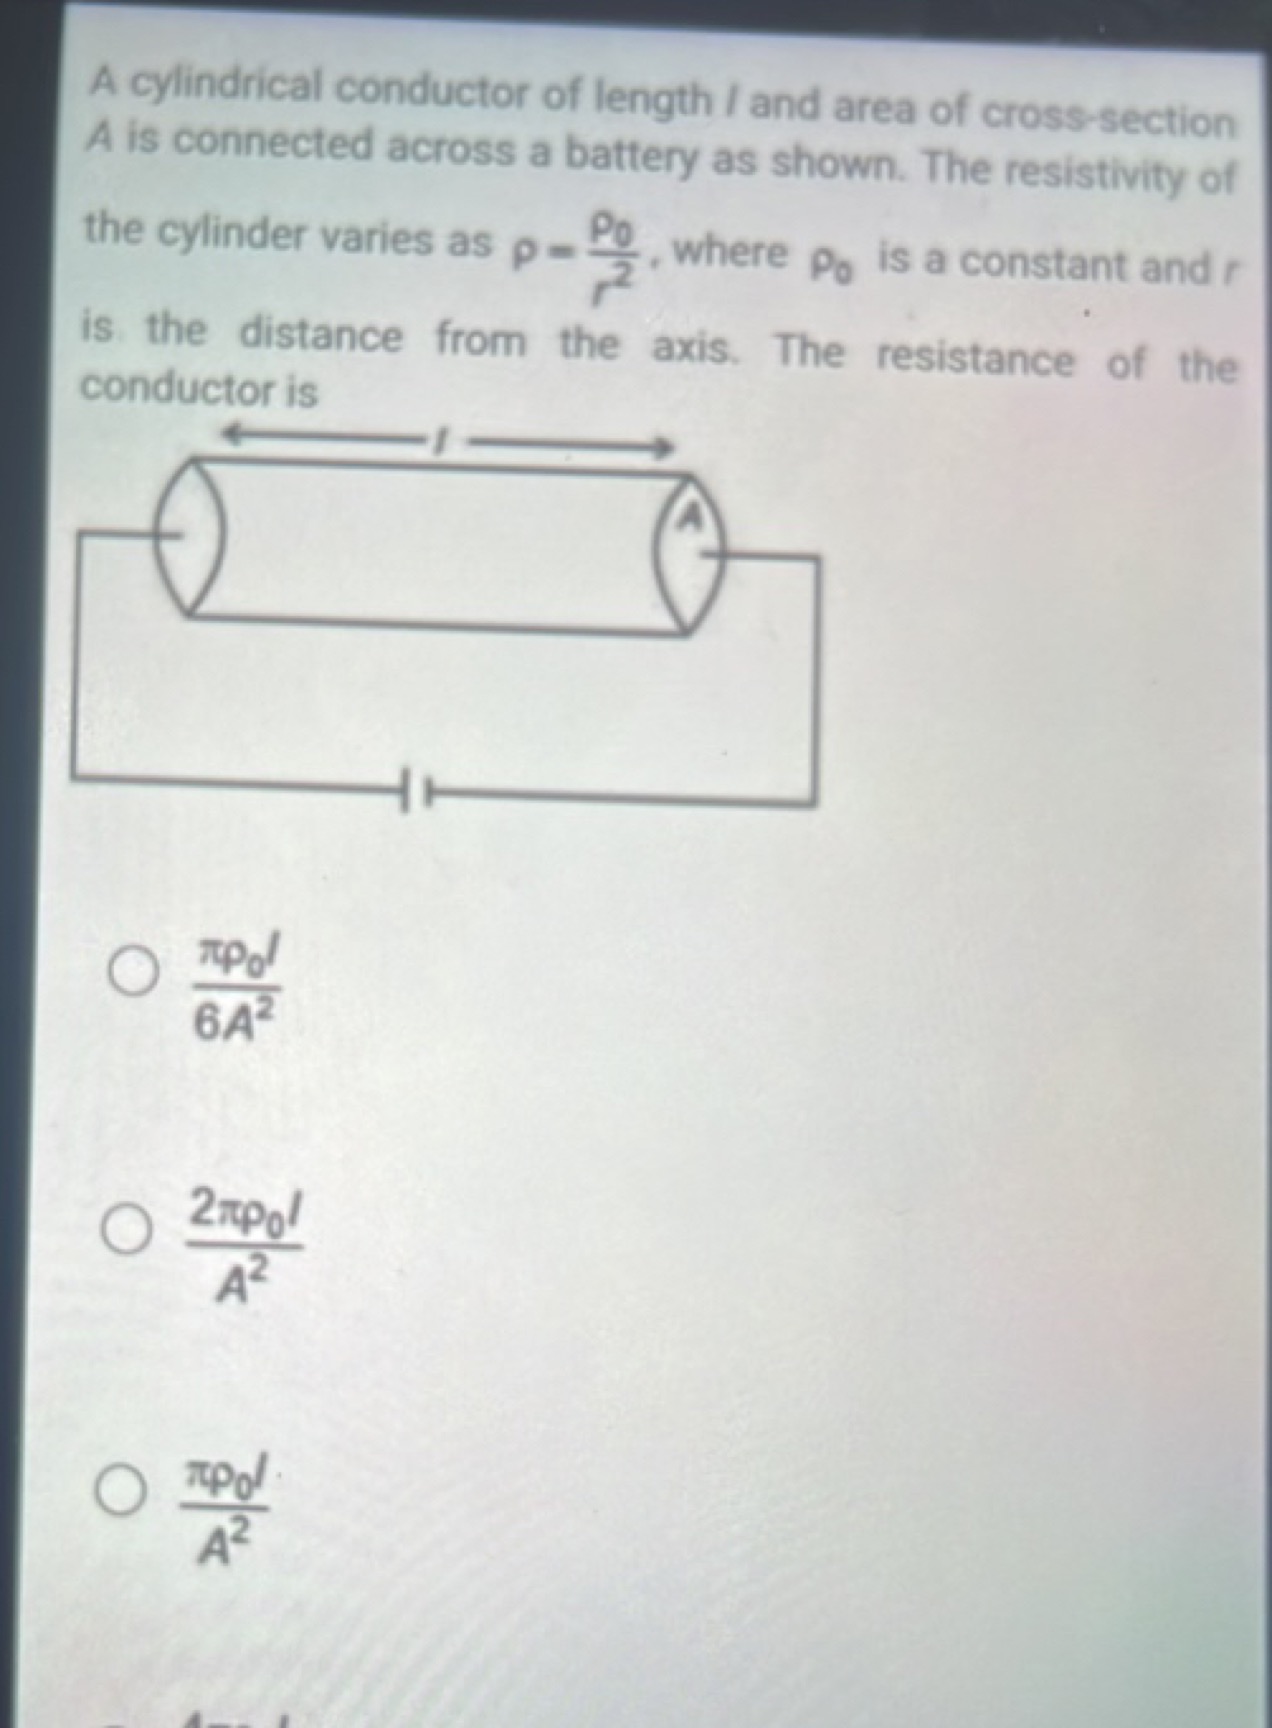 A cylindrical conductor of length / and area of cross-section A is con